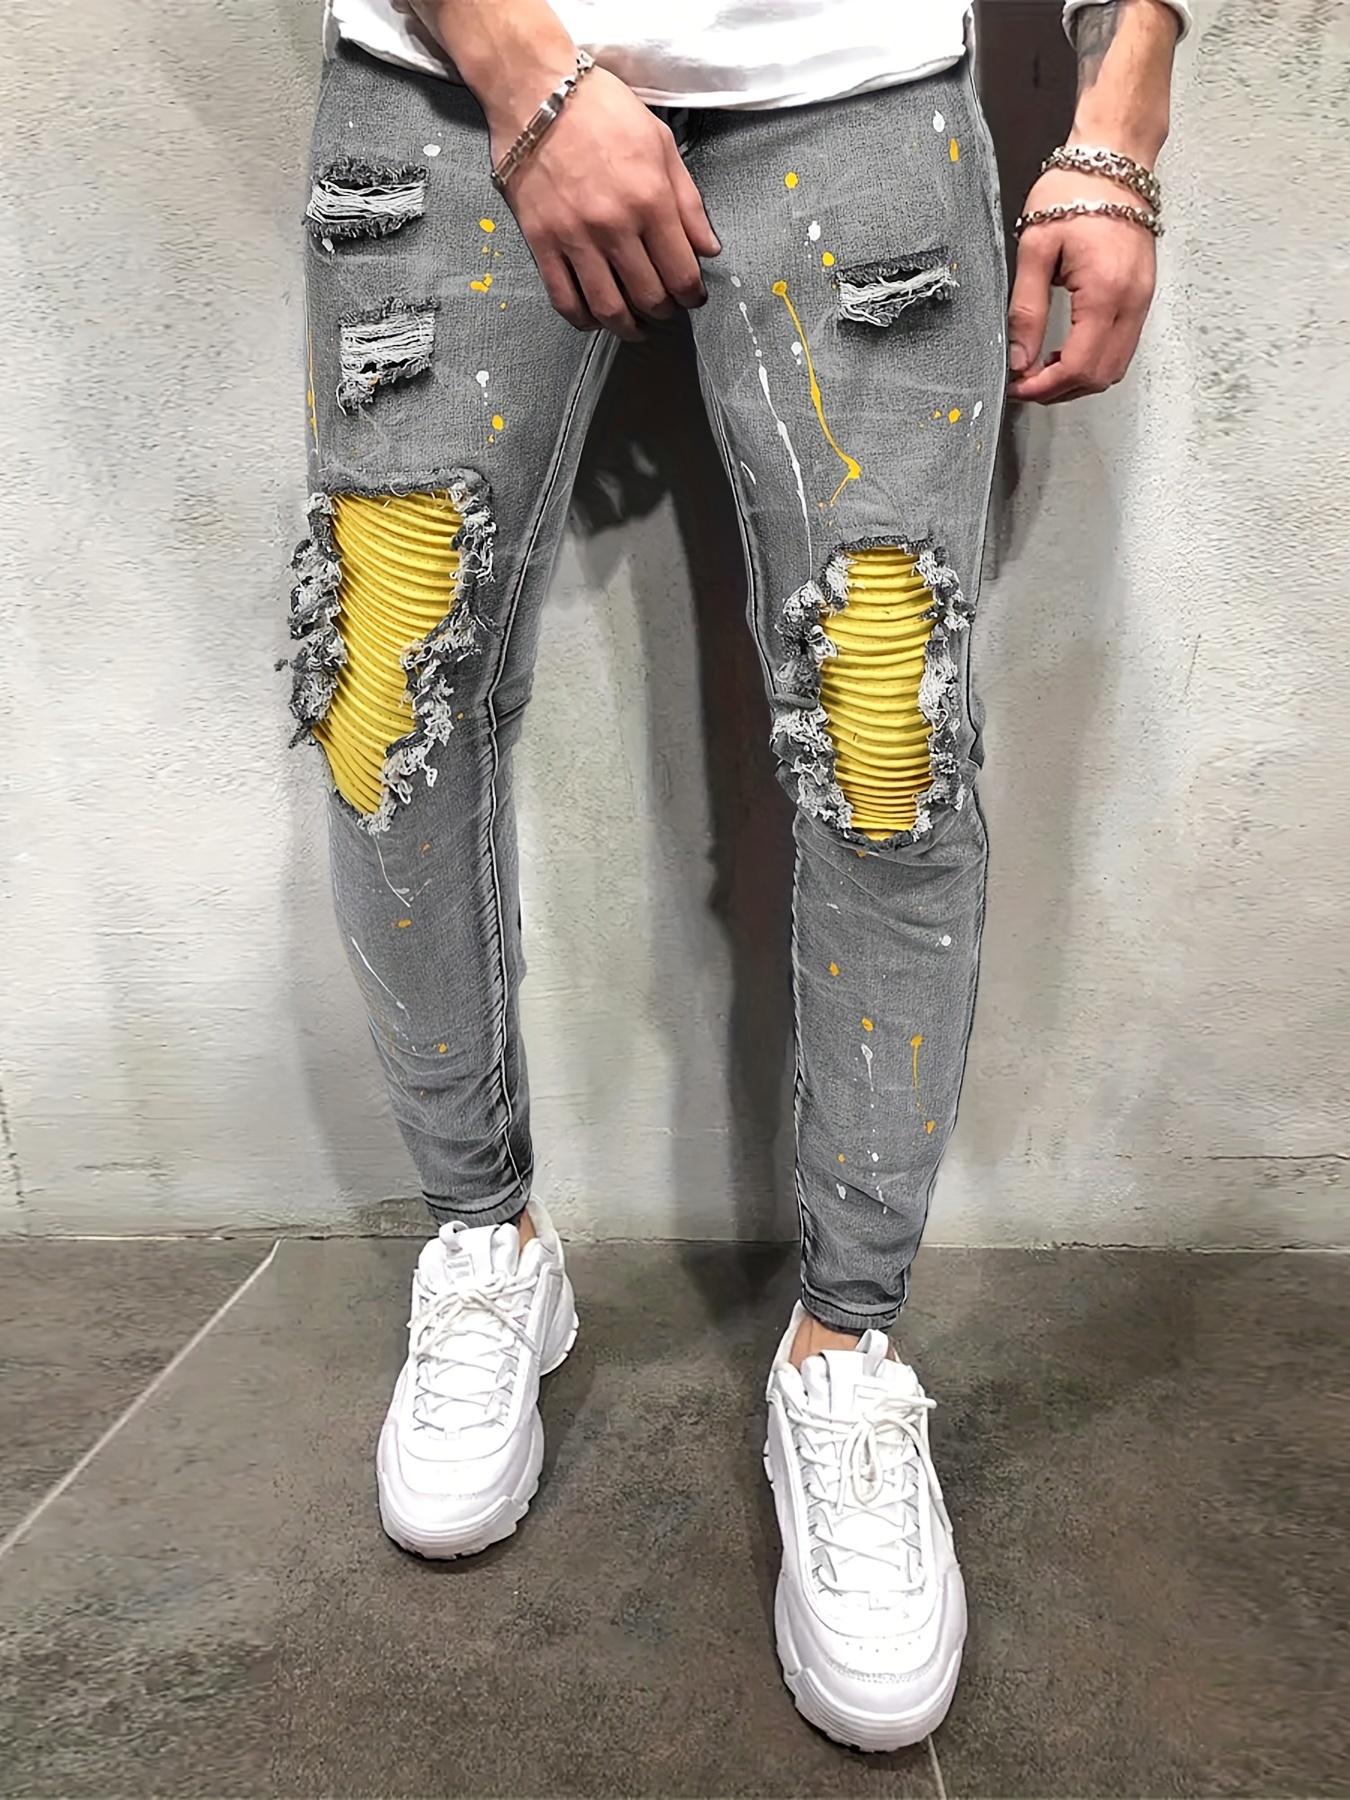 Ripped Jeans: How To Make Ripped Jeans ( DIY )  Ripped jeans men, White  jeans men, Diy ripped jeans